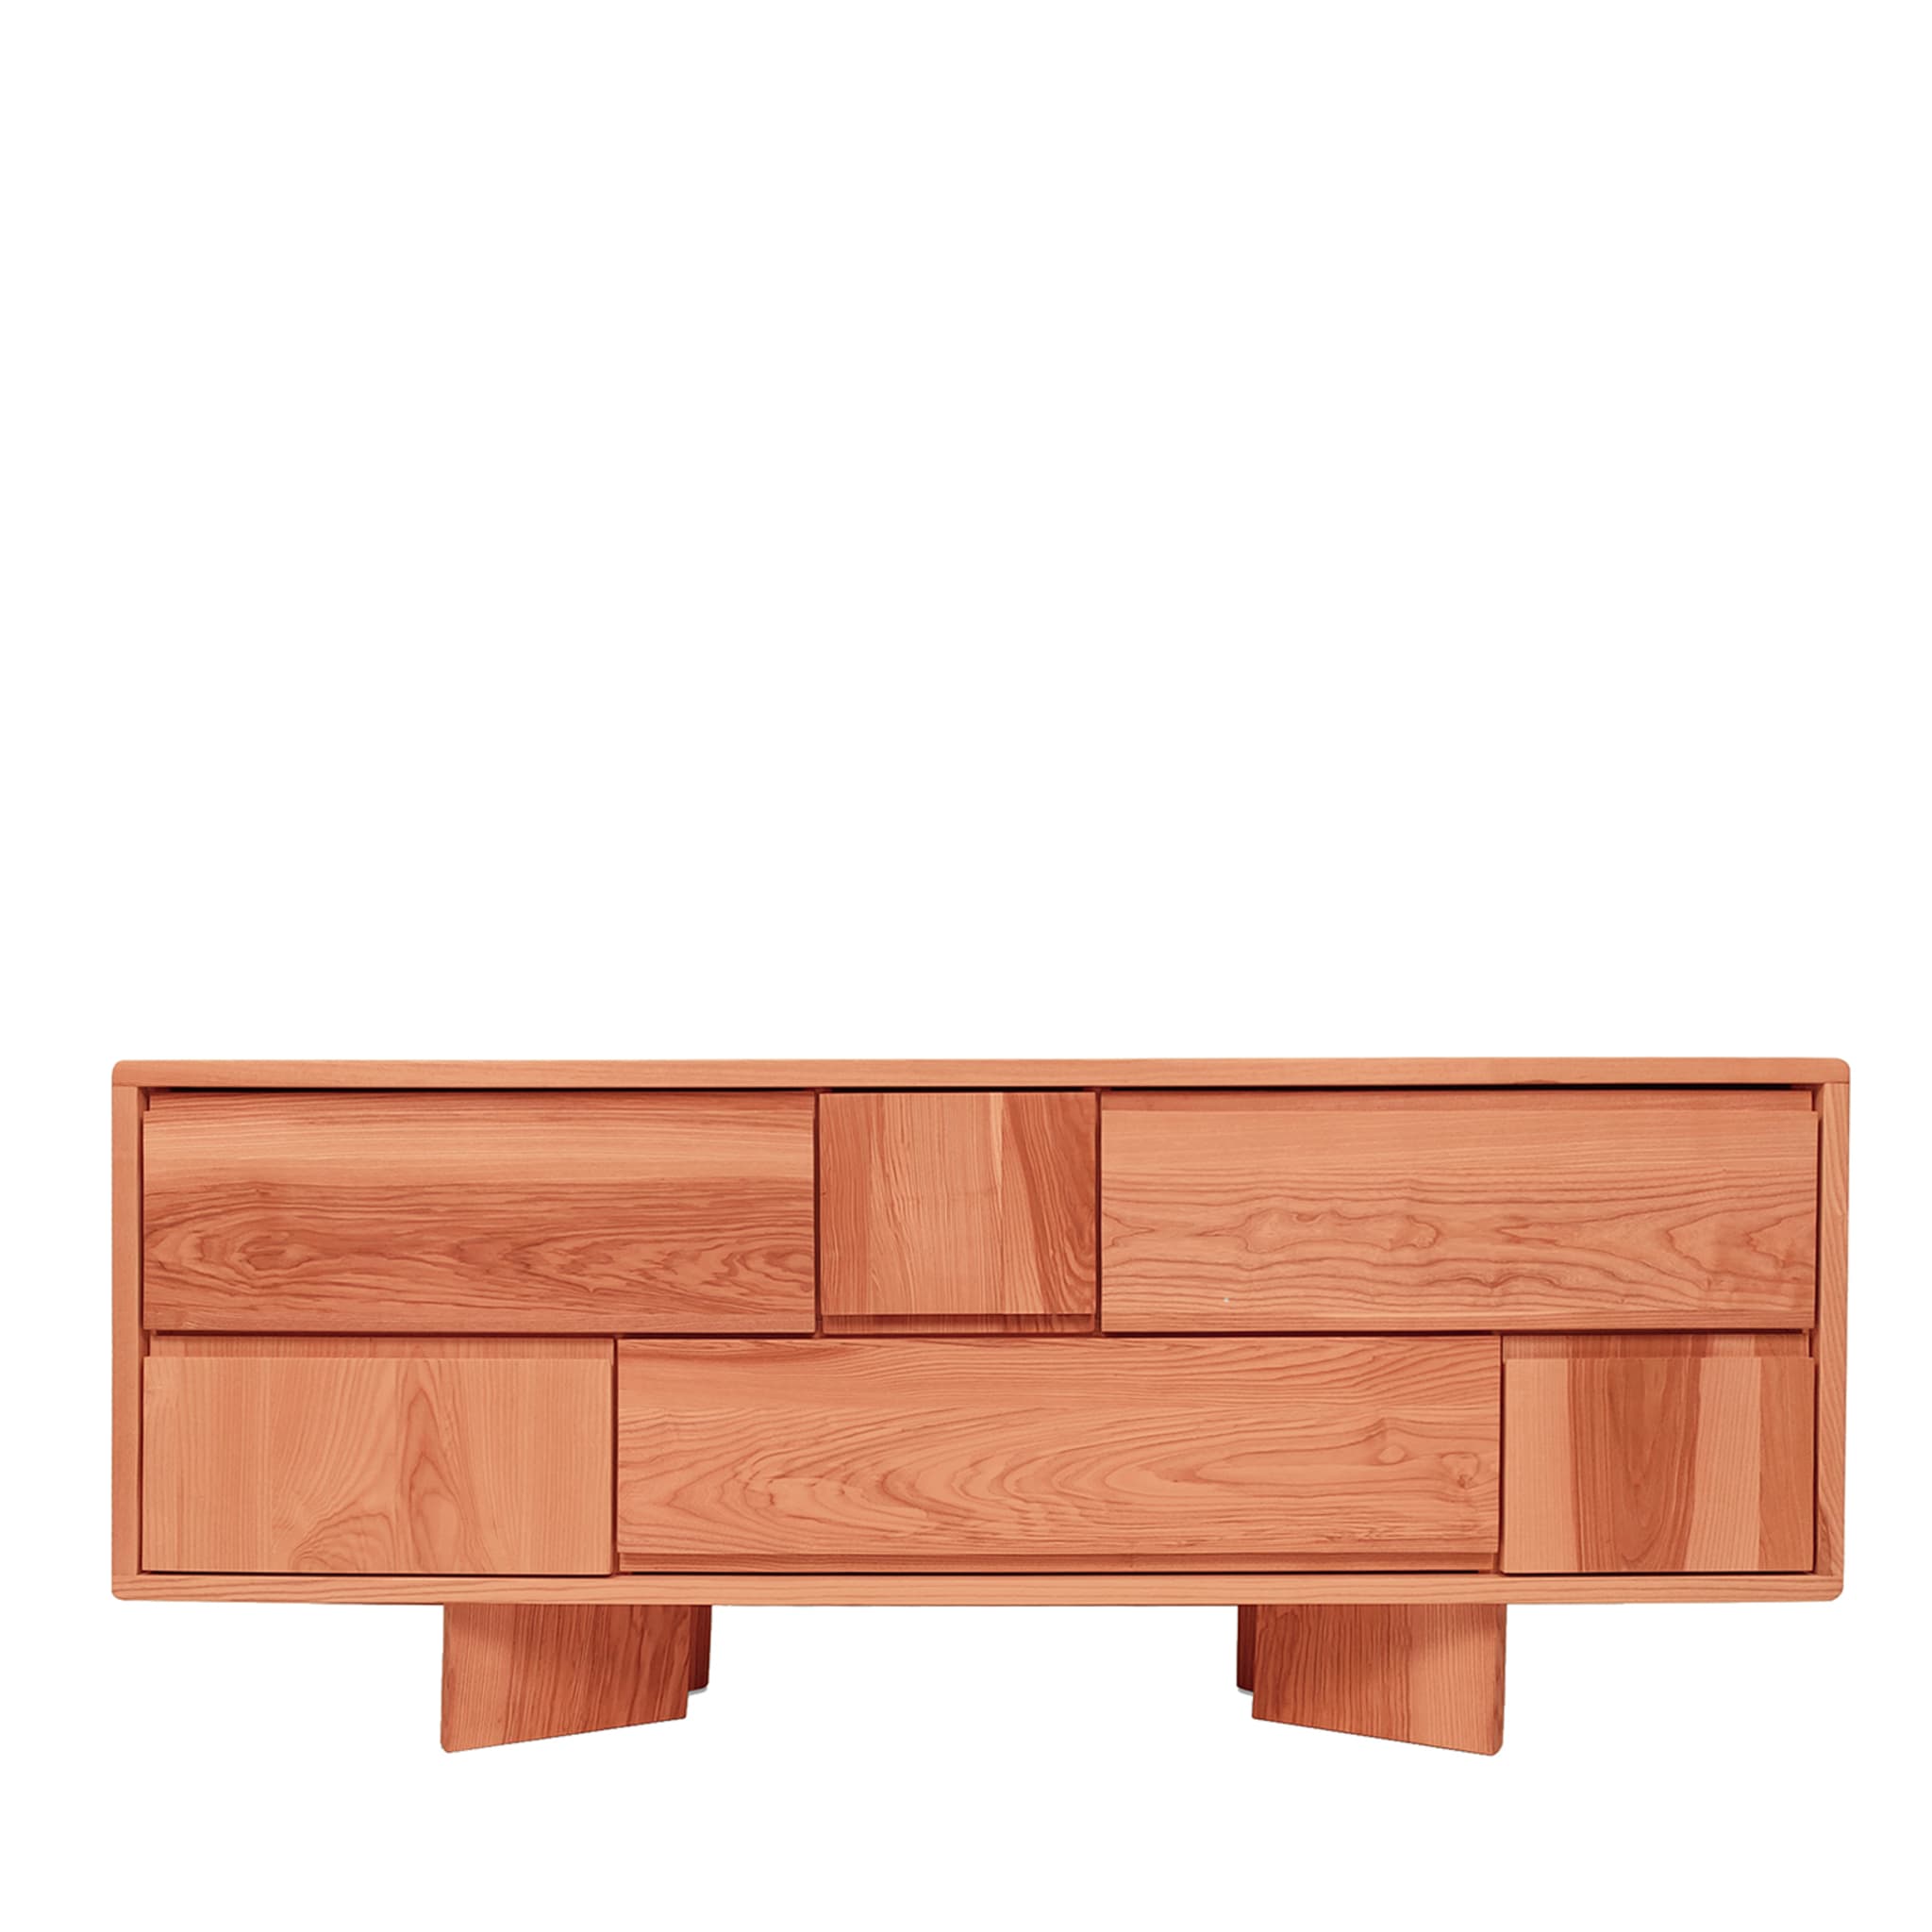 Zhu Brown Sideboard by Eugenio Gambella - Main view